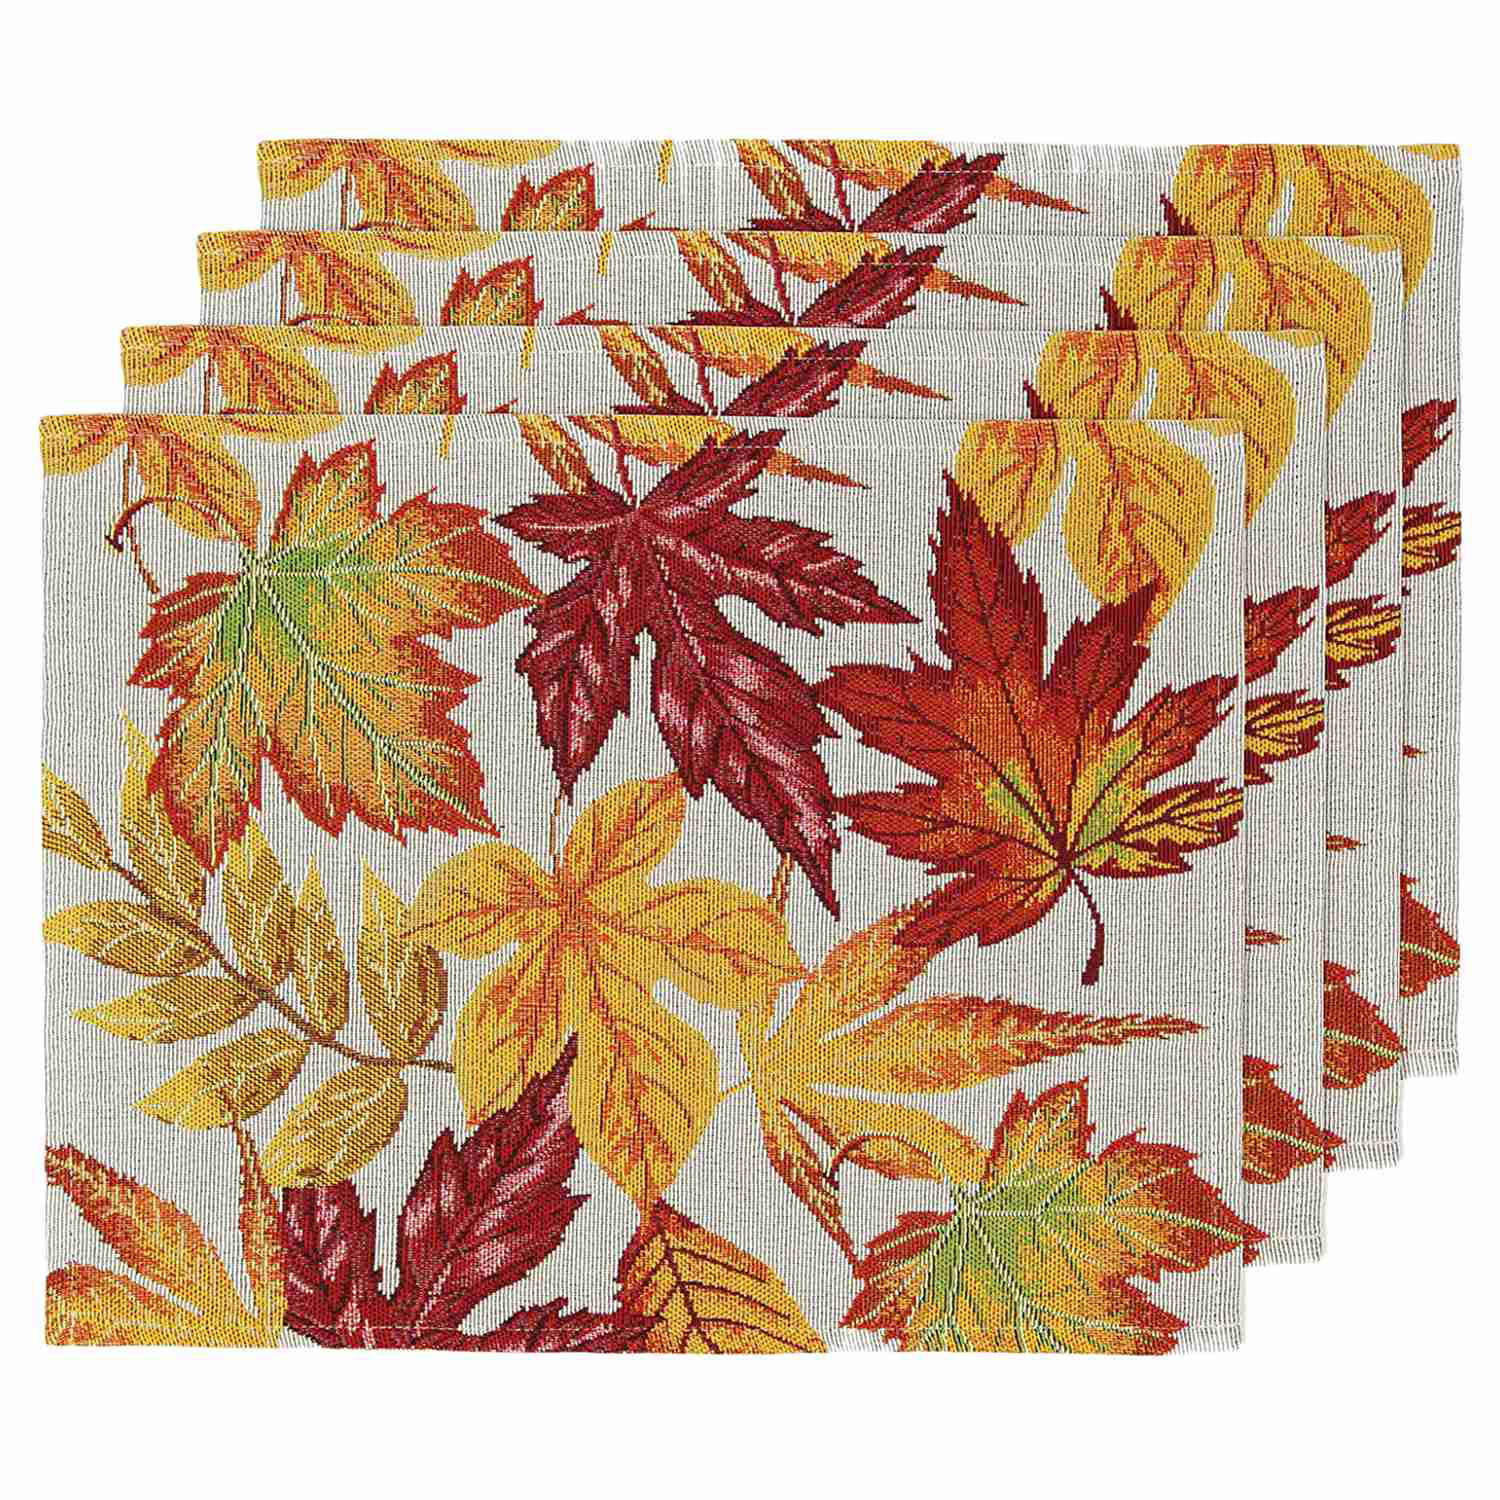 Autumn Maple Leaves Fall Foliage Single Cotton Quilted Placemat 